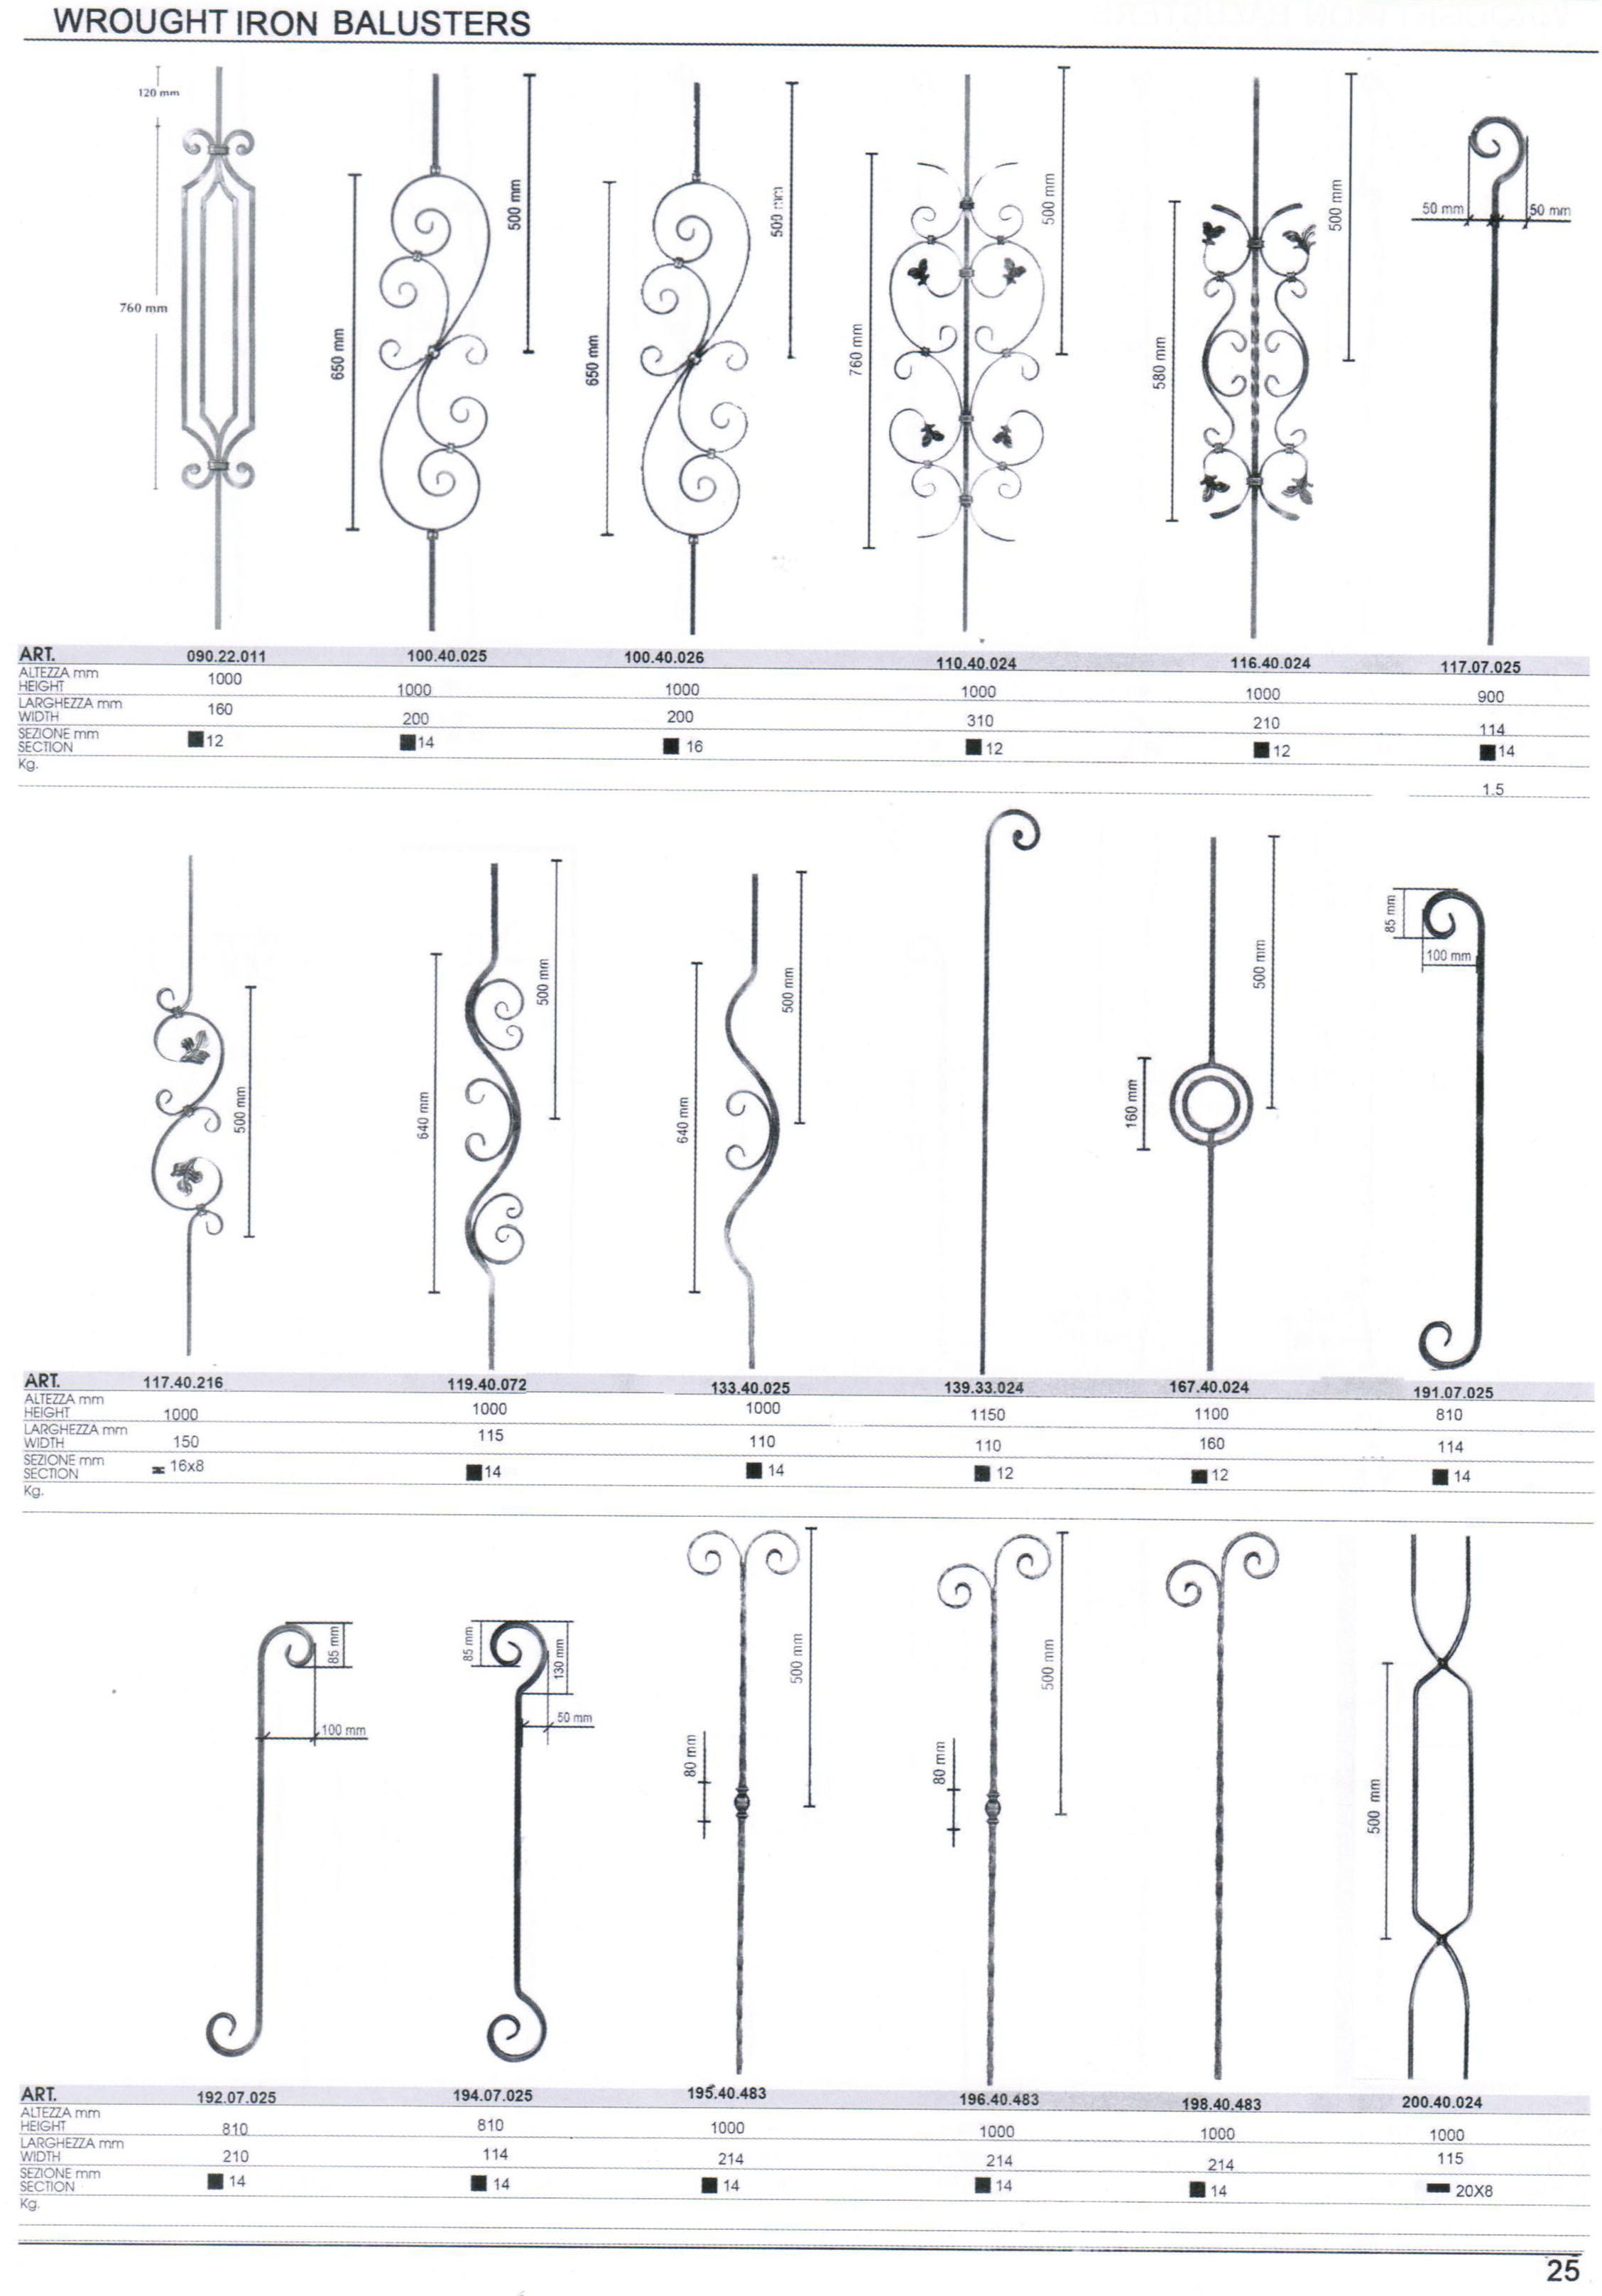 Forged Steel-Baluster-01